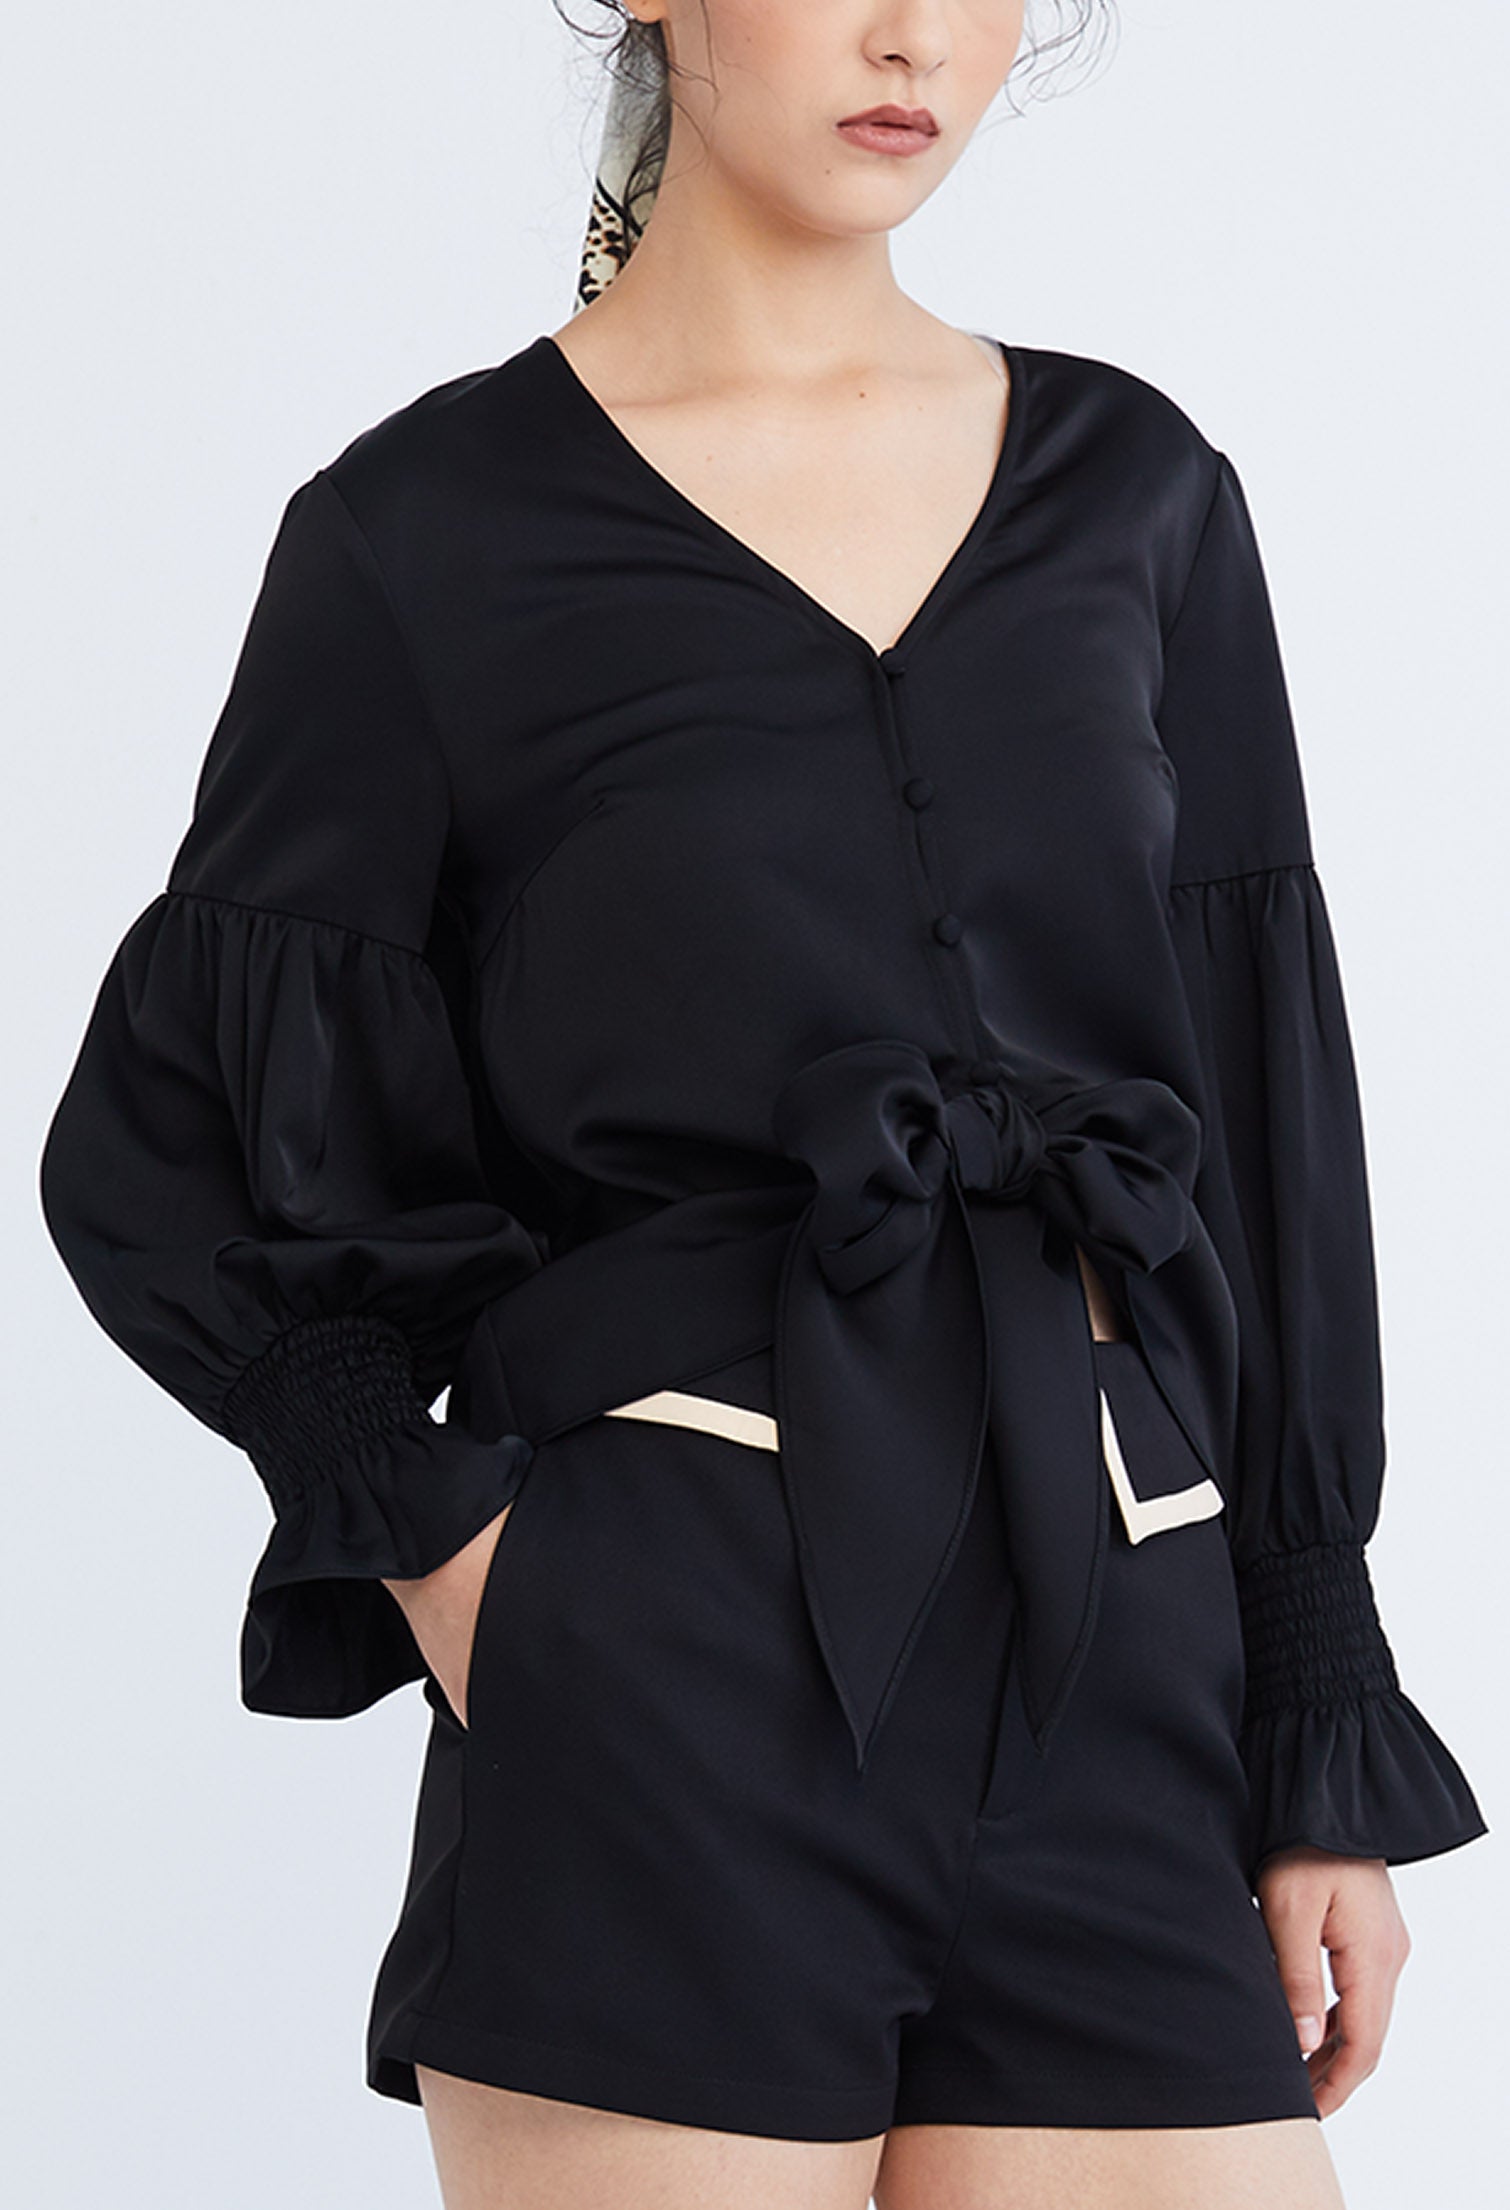 Dainty Elastic Cuff Front Tie Blouse